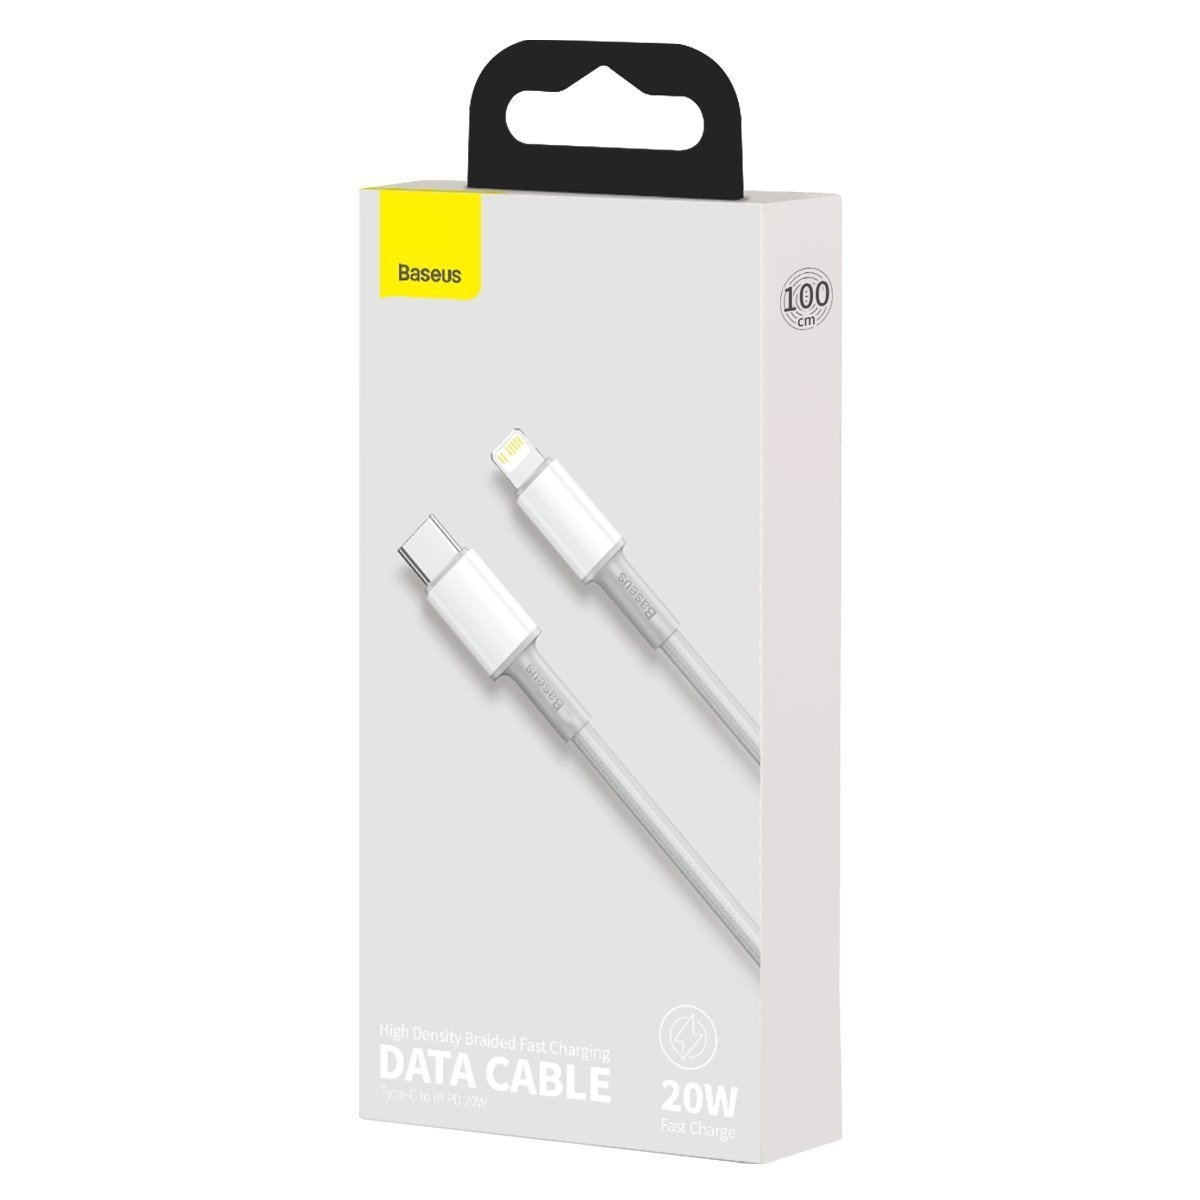 Baseus High Density Braided Cable Type-C to Lightning, PD, 20W, 1m (white)